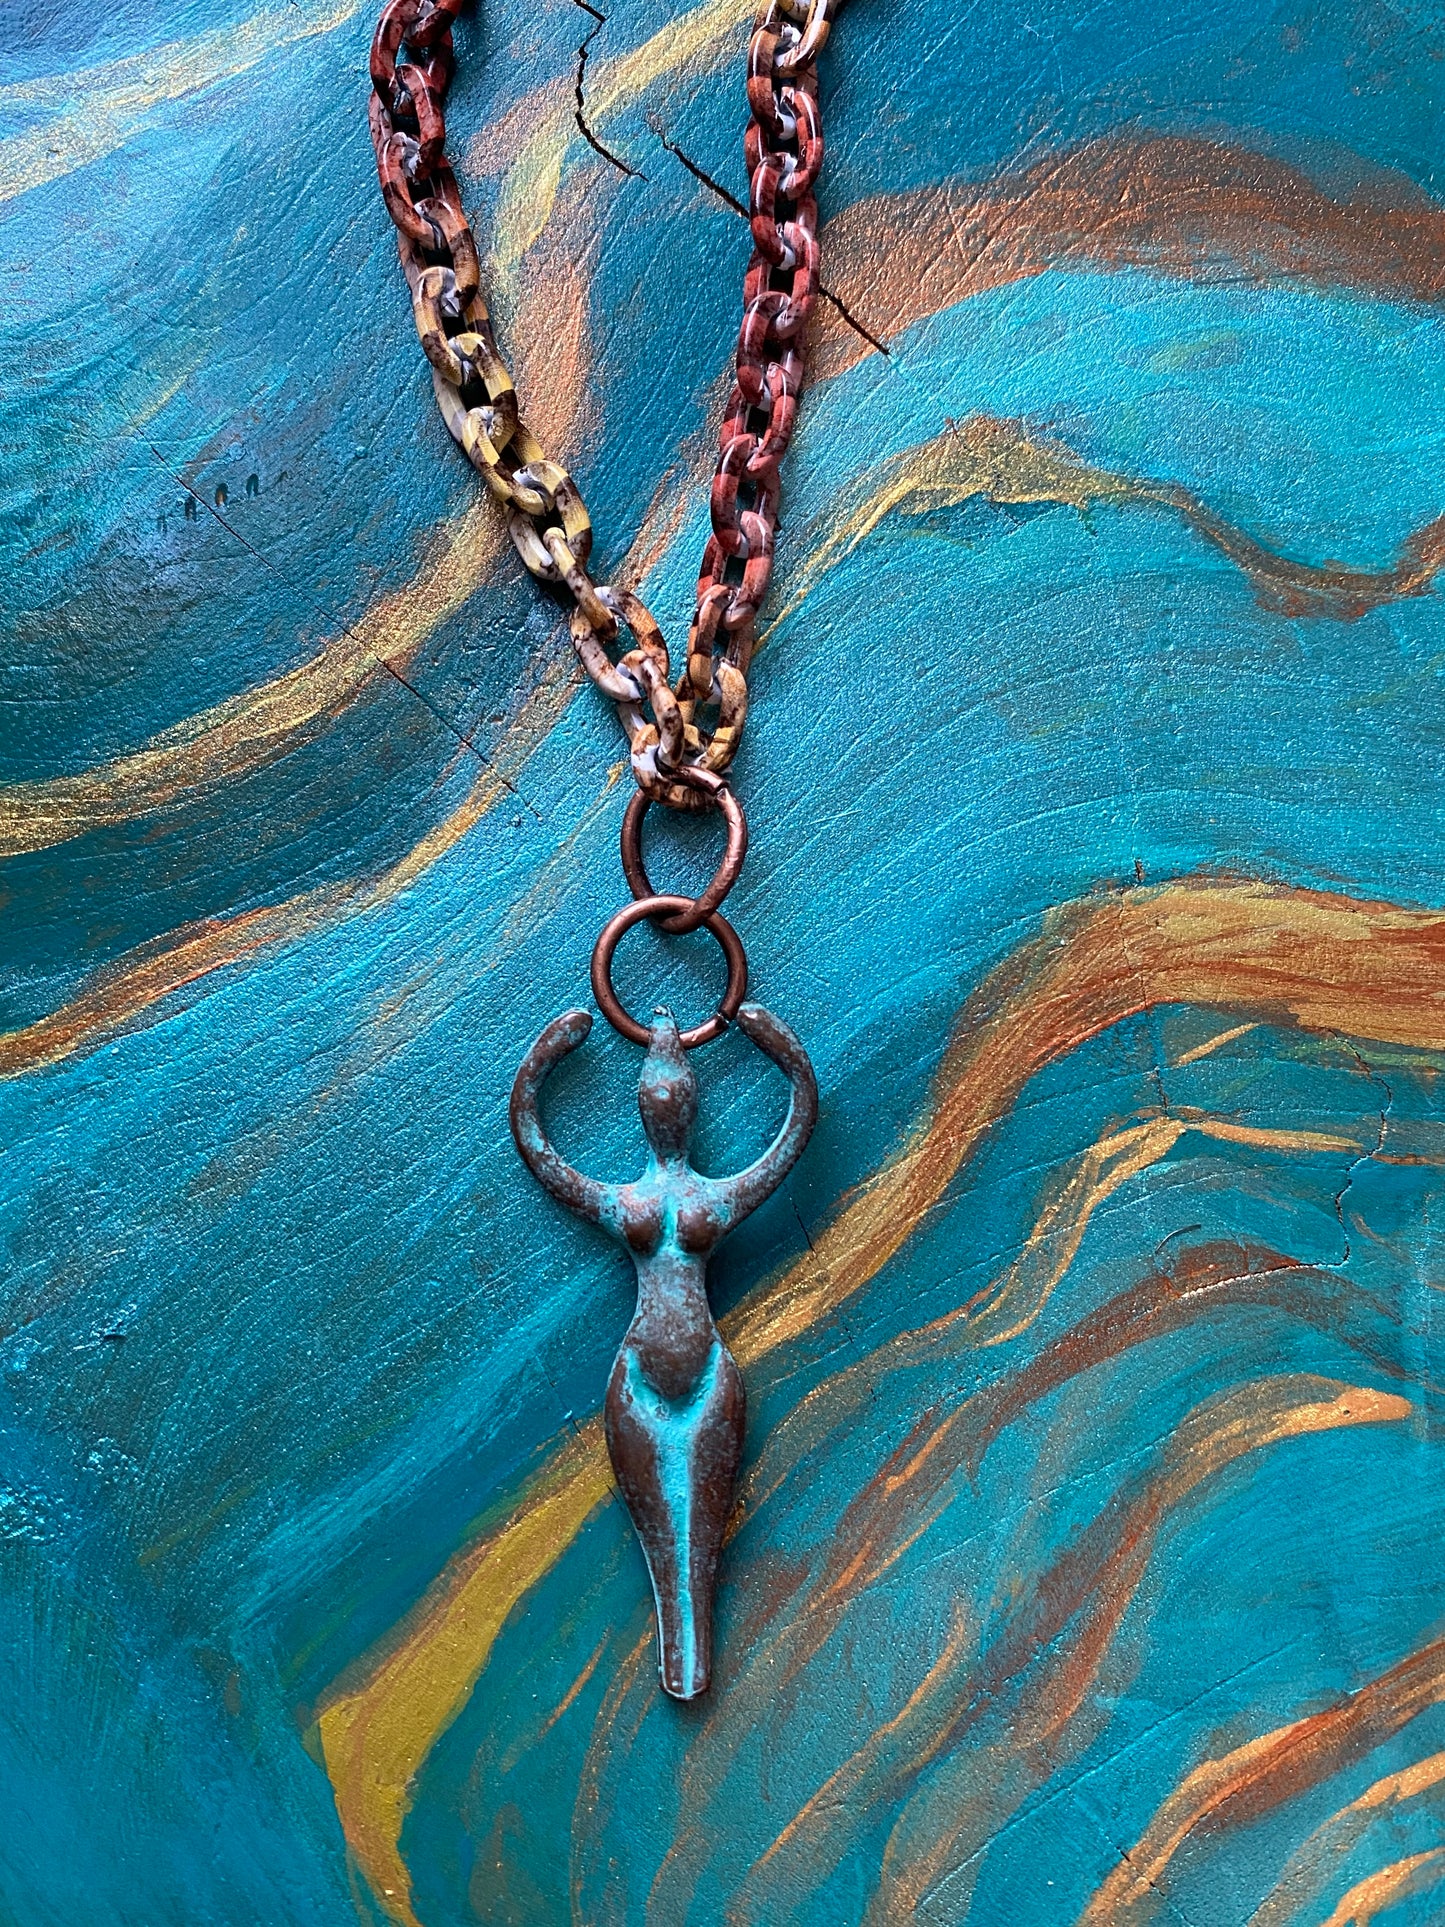 SALE Goddess Patina Turquoise Necklace on Earthtone Chain